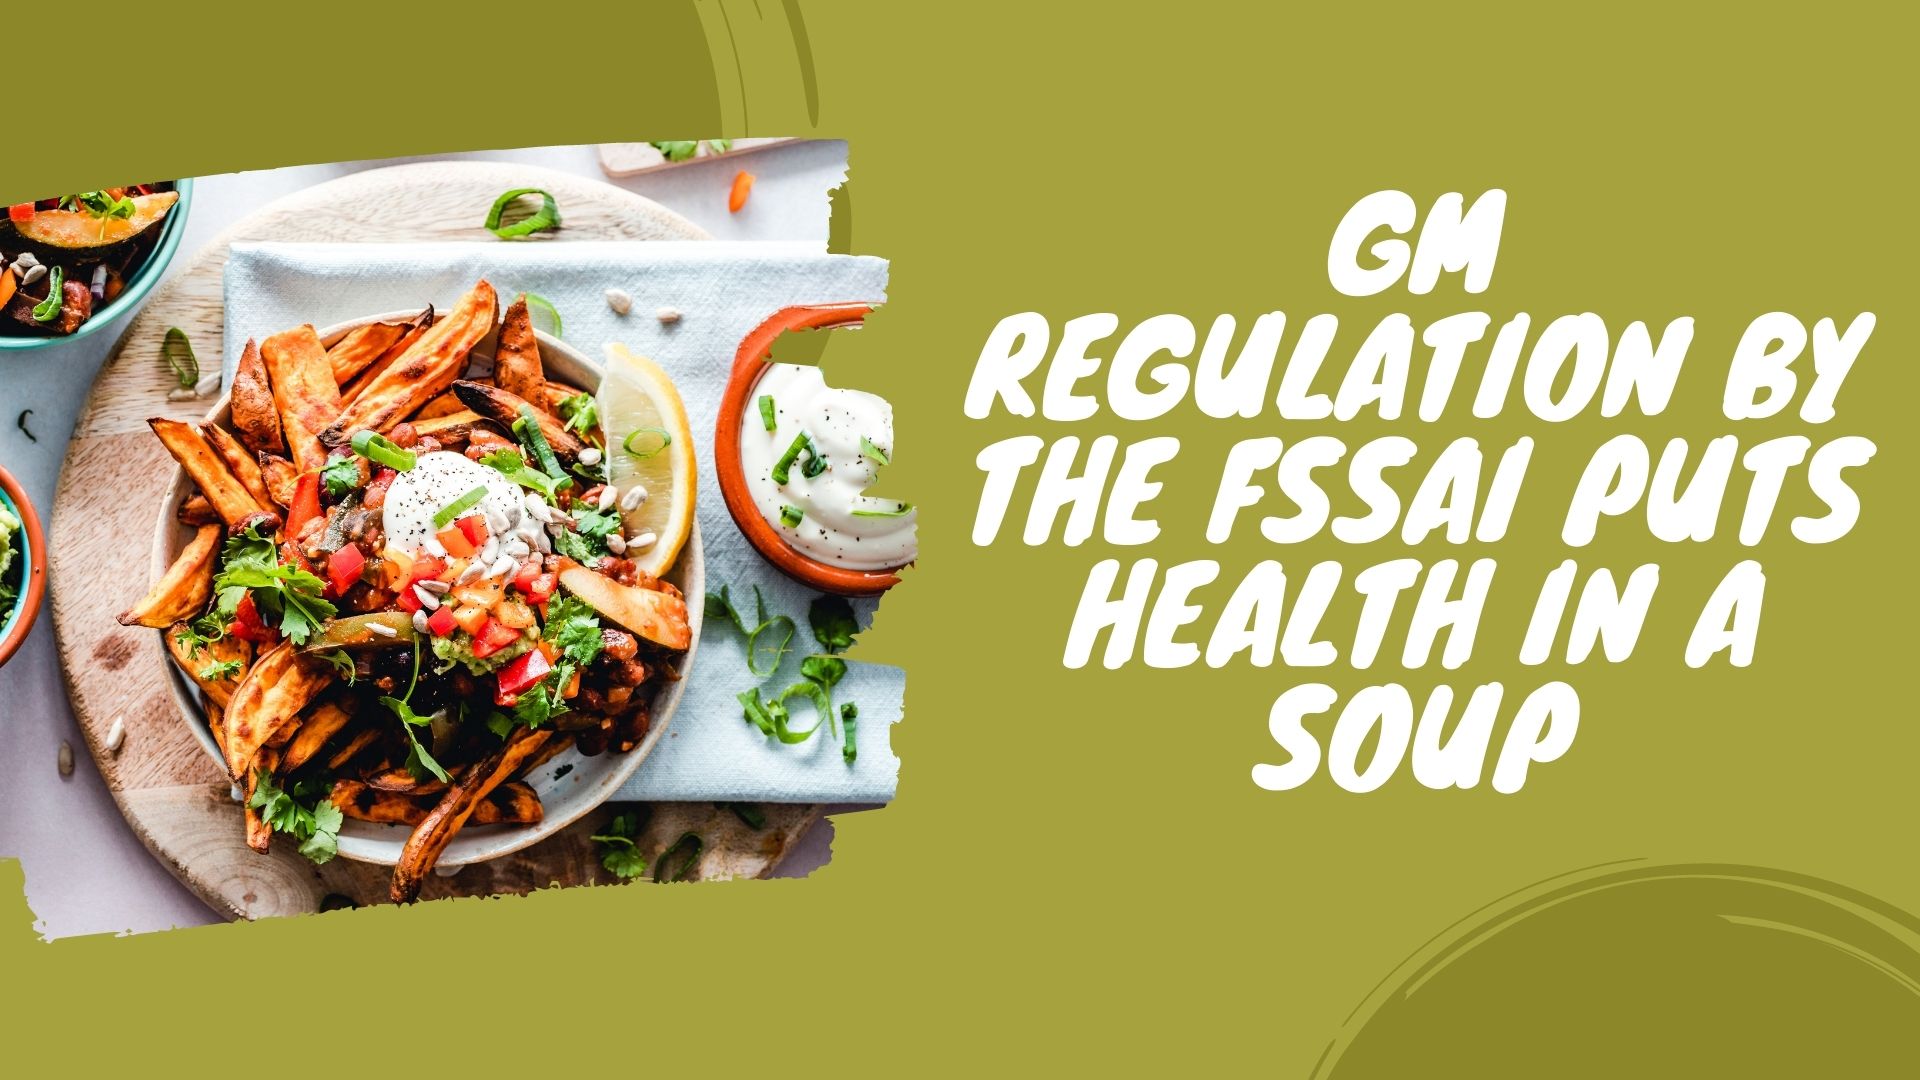 GM Regulation by the FSSAI Puts Health in a Soup